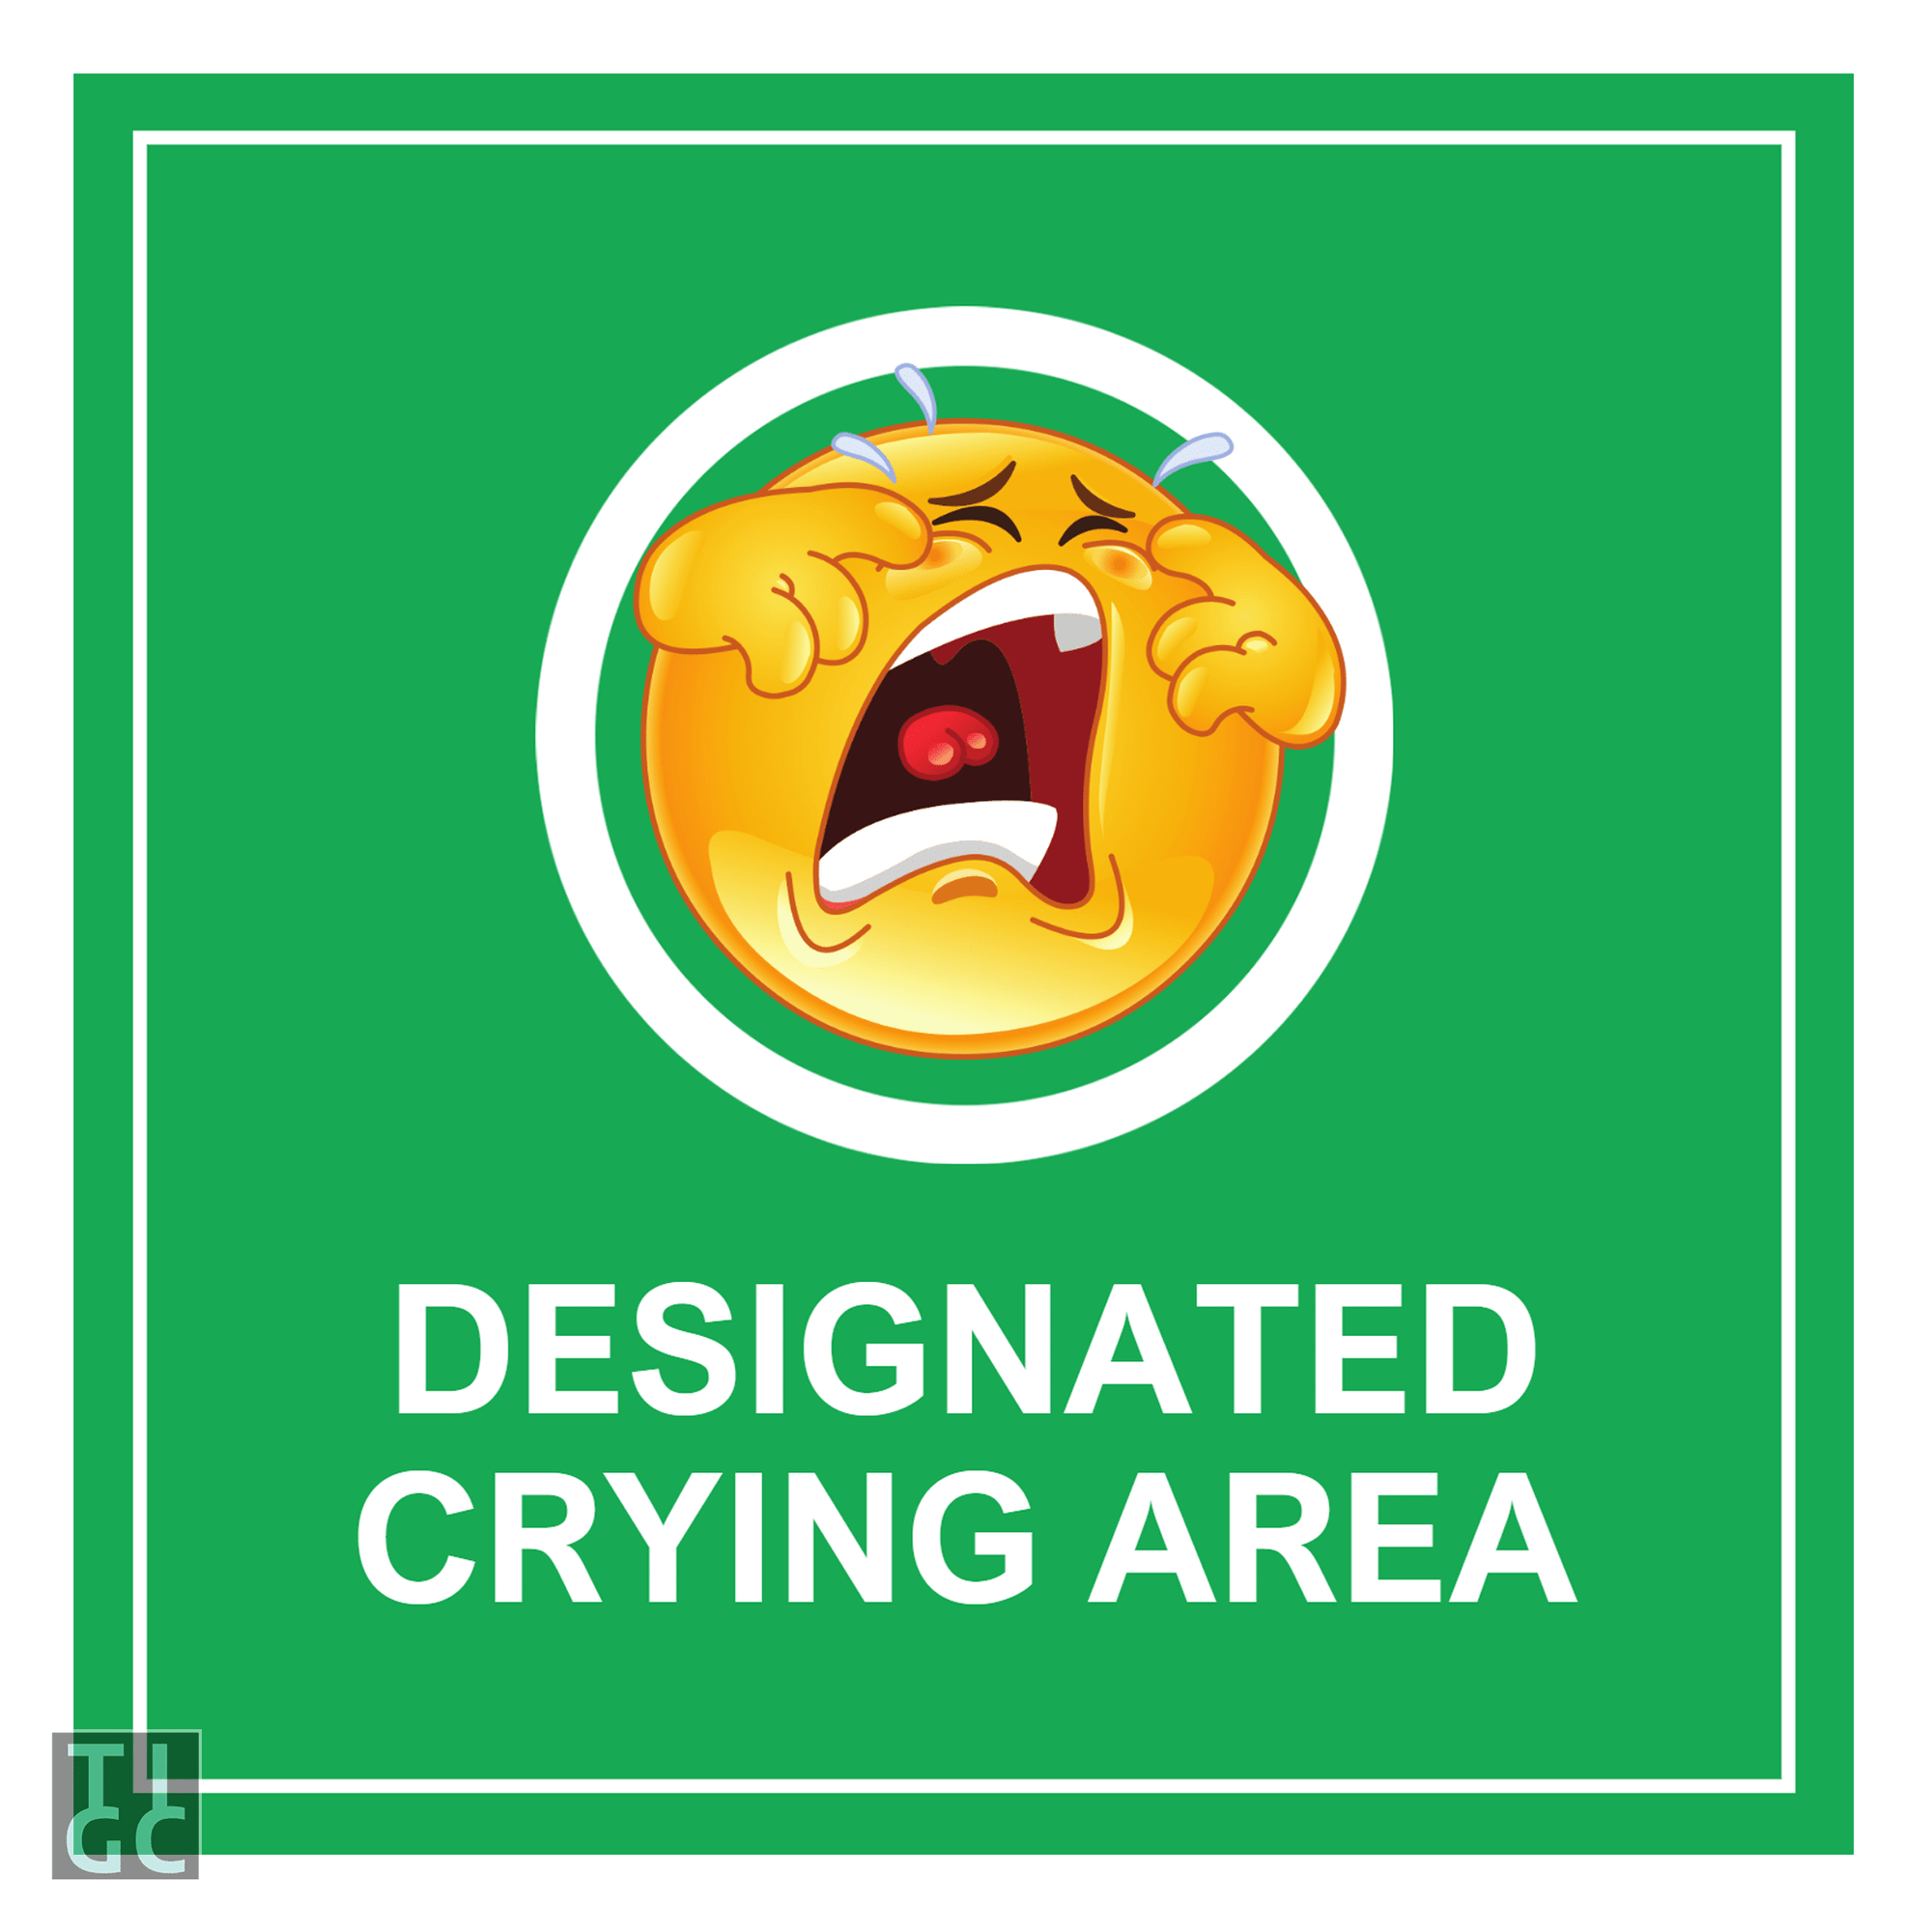 TIGC The Inappropriate Gift Co Designated Crying Area sign (Digital Download Only)